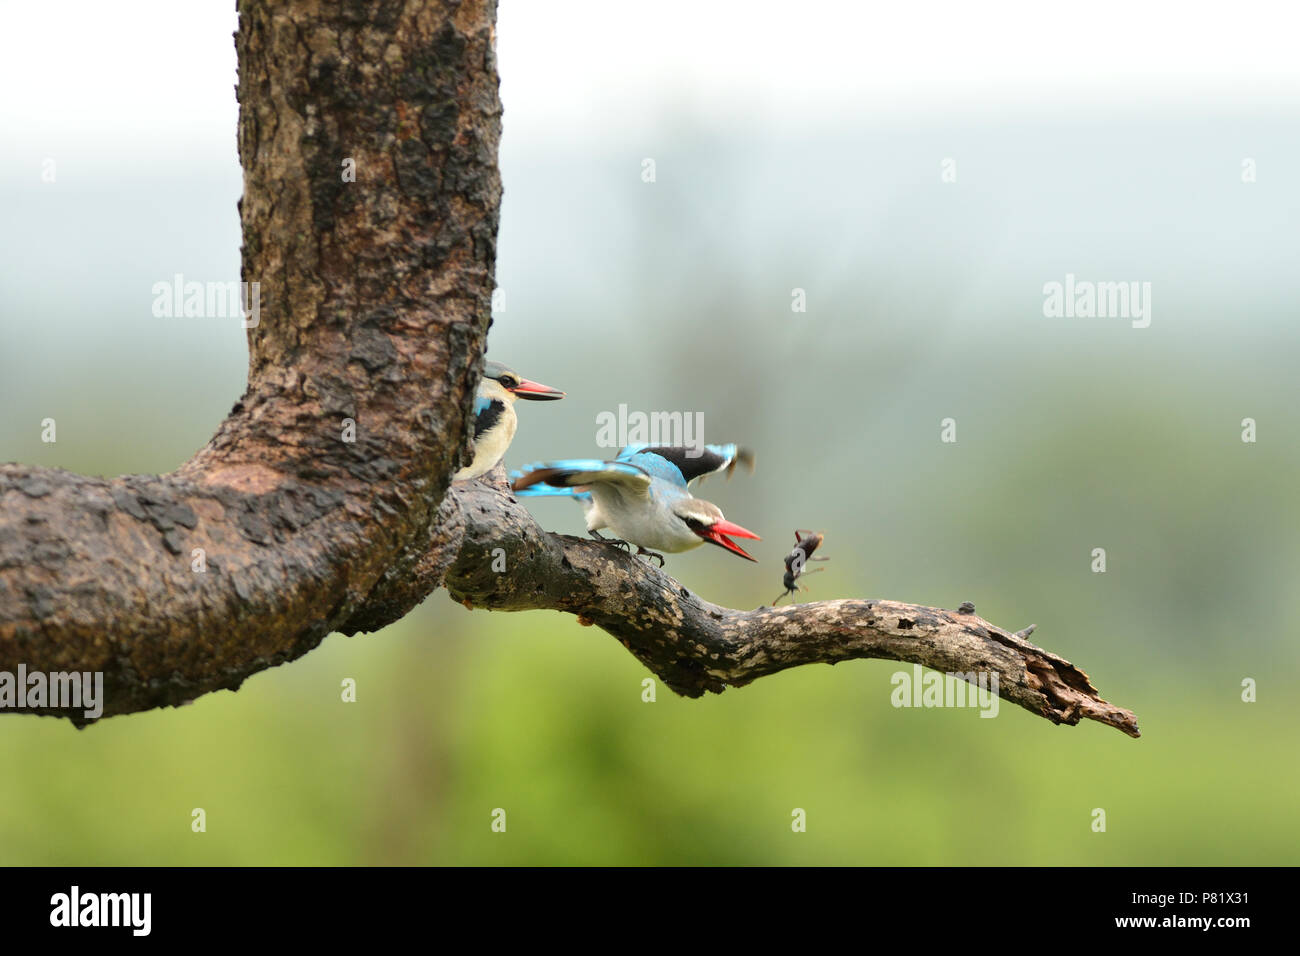 Male and female forest king fisher eating feeding on insect, Kruger Stock Photo